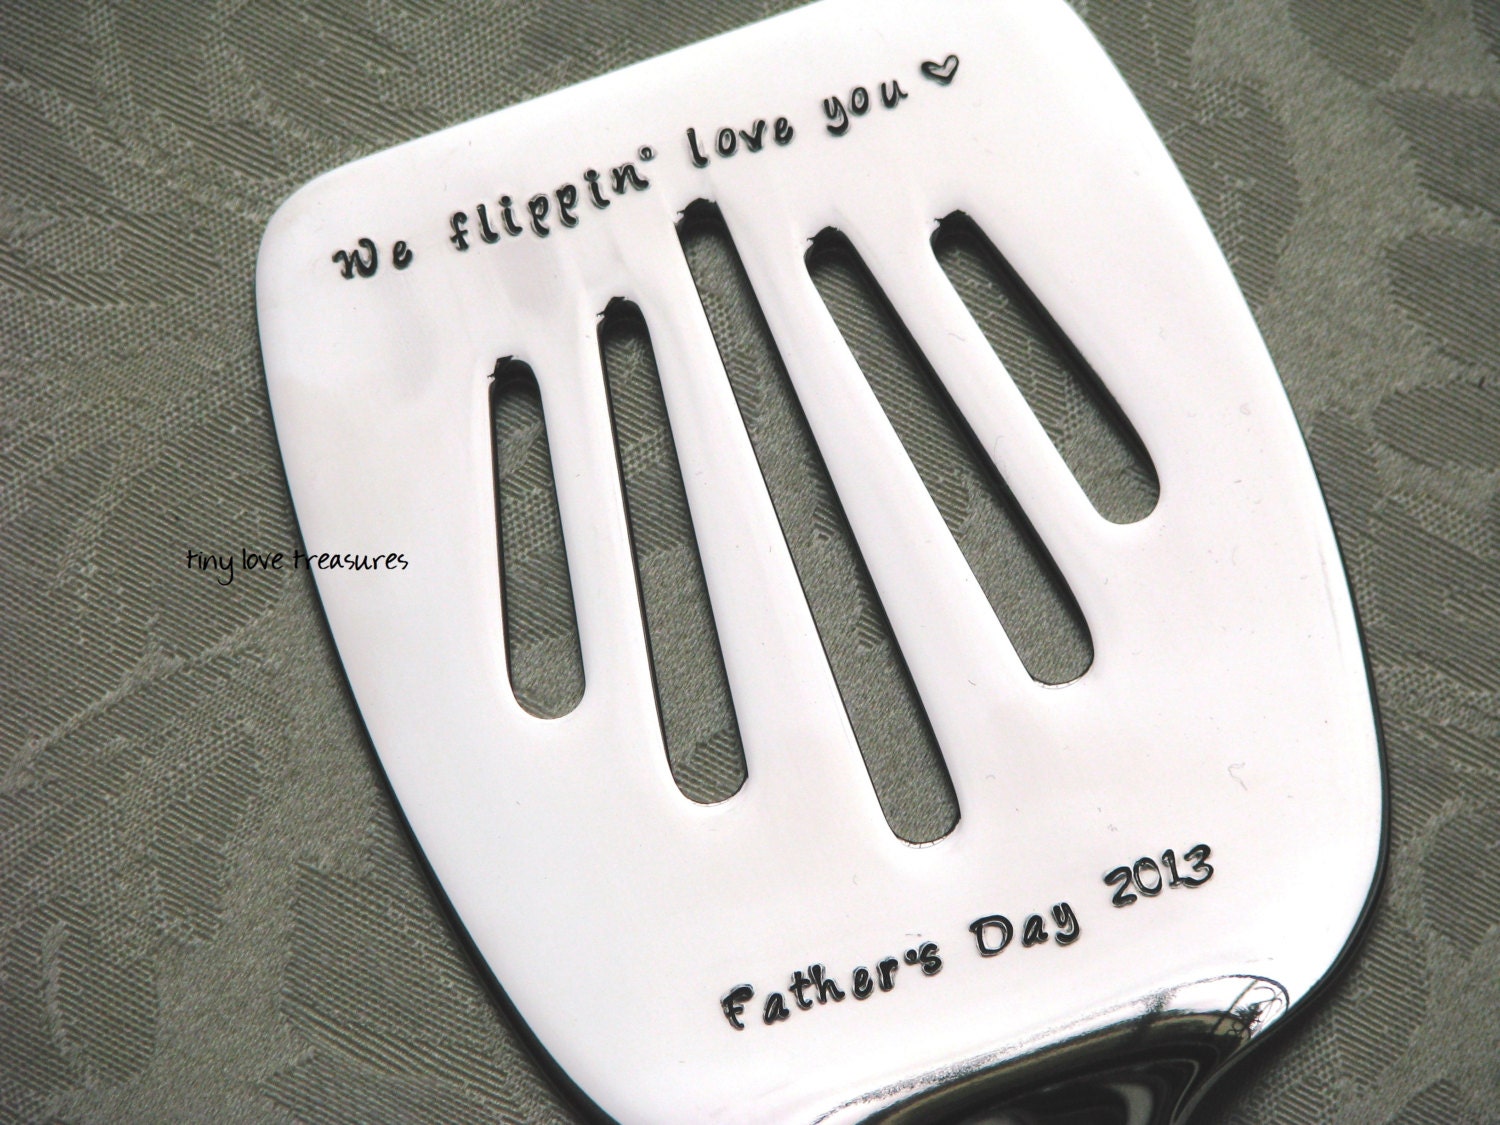 We flippin love you - (will not be shipped in time for Father's Day) hand stamped stainless steel spatula for BBQ or cooking in the kitchen